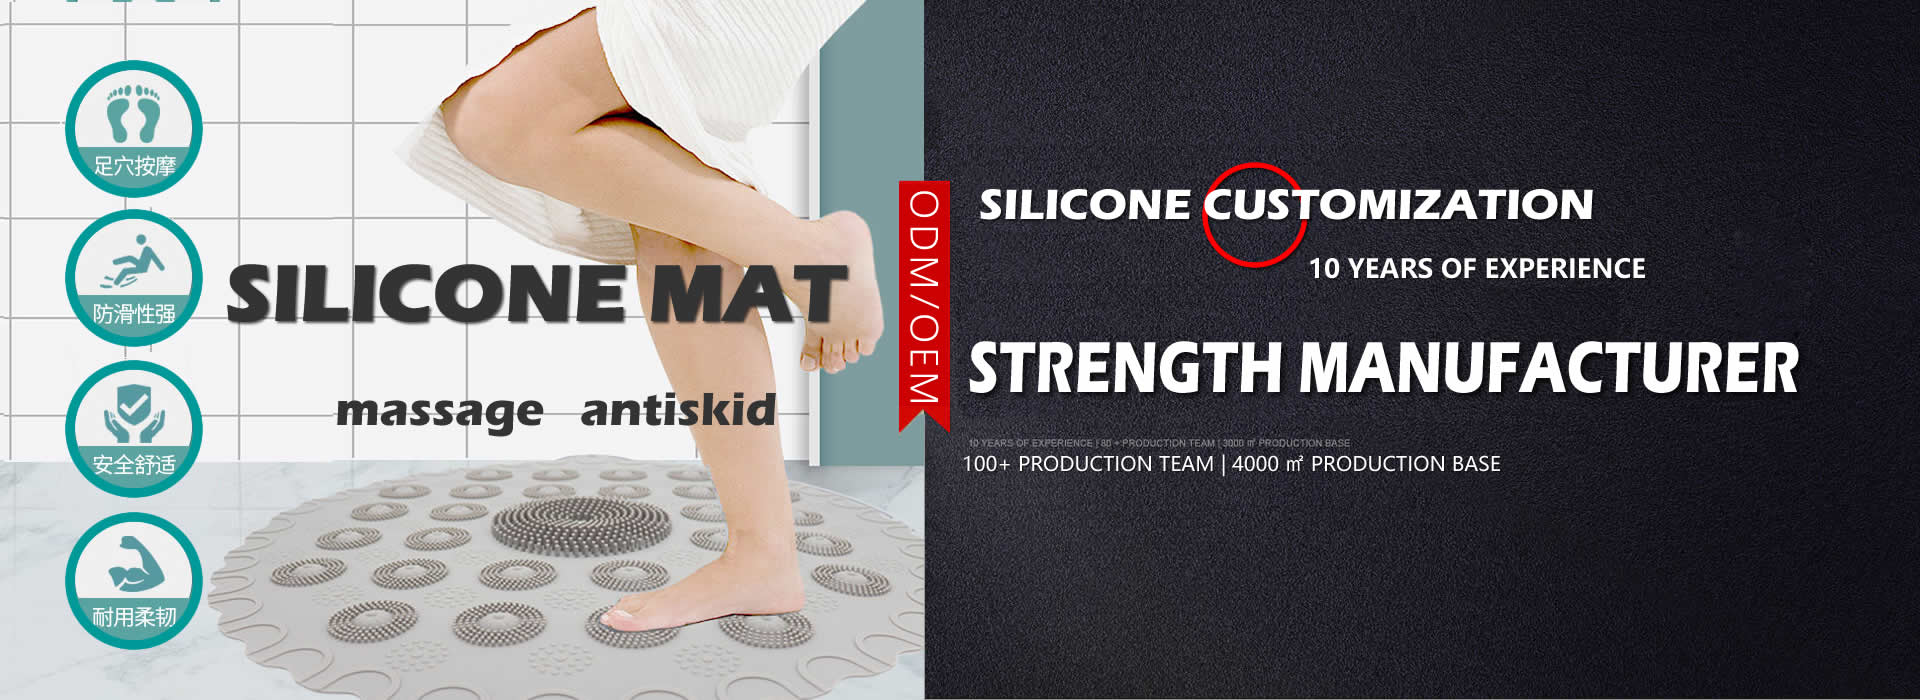 Silicon products